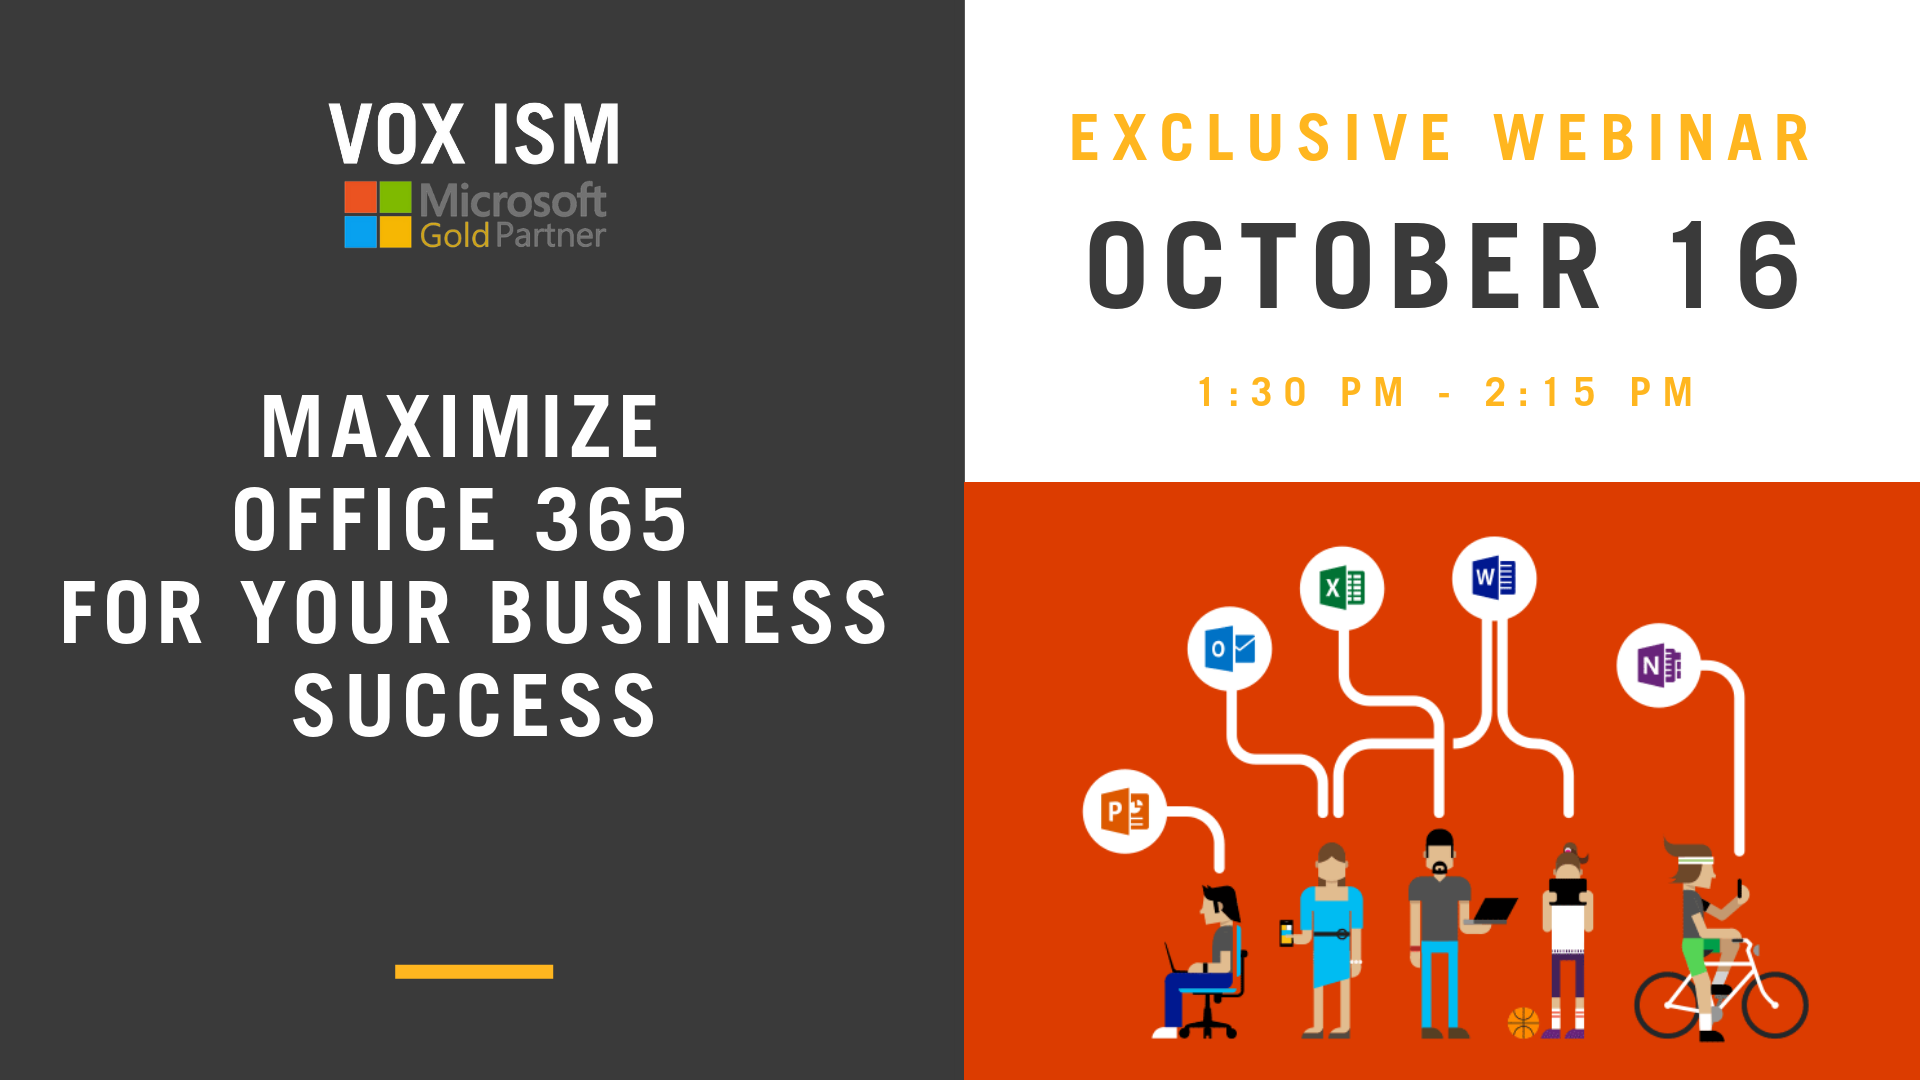 Maximize Office 365 for Your Business Success - October 16 - Webinar - VOX ISM